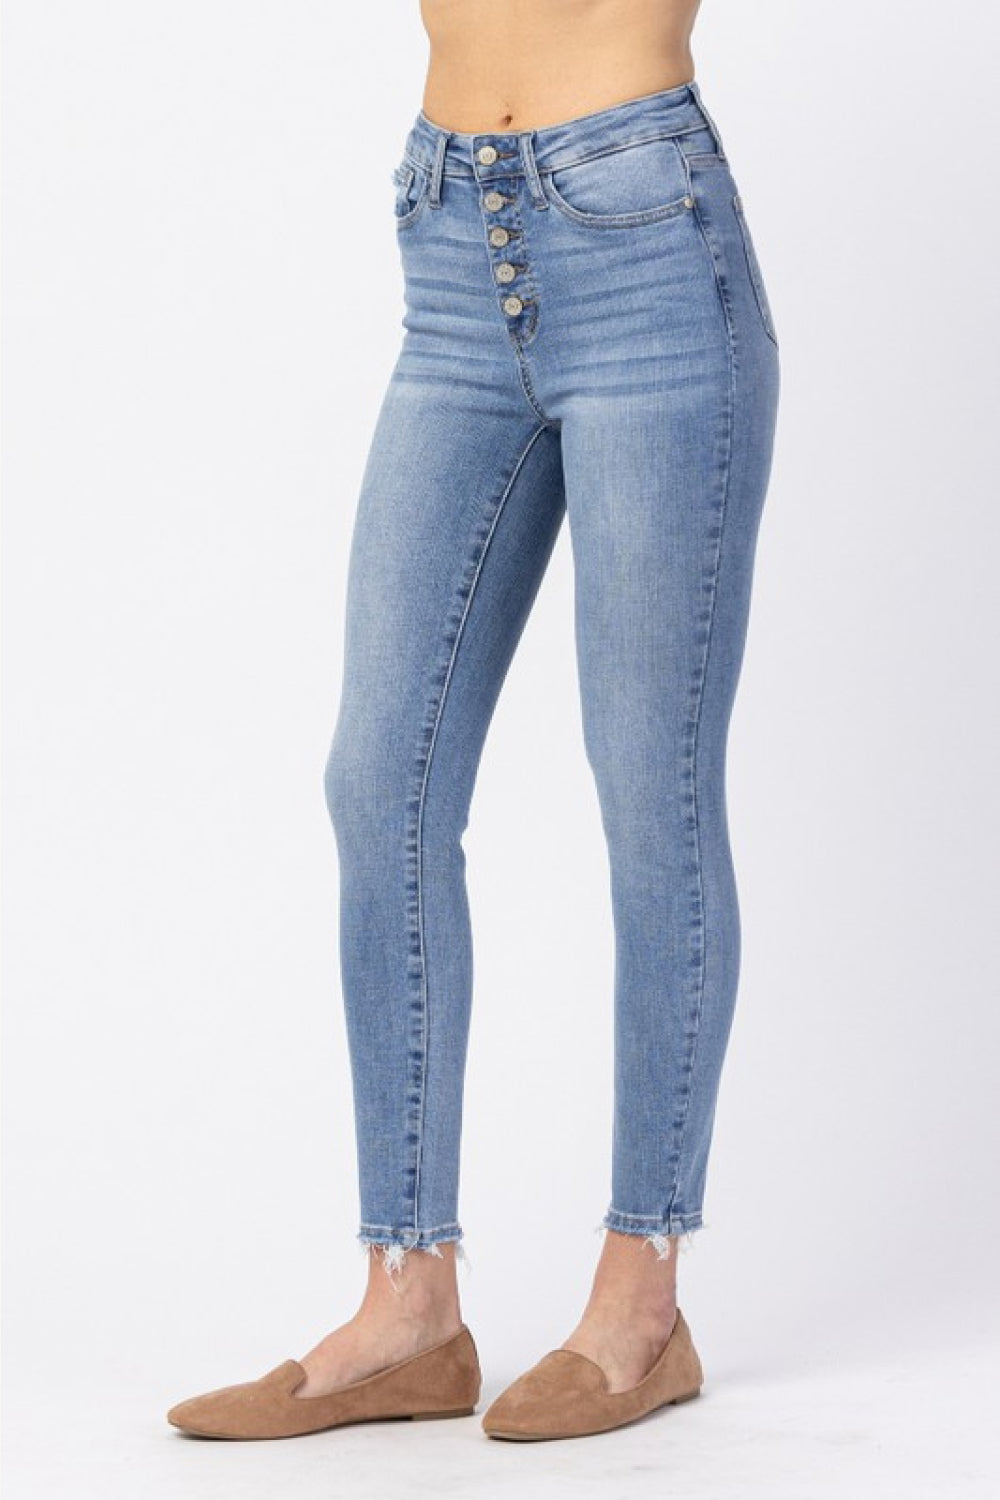 Side View, Judy Blue, Women's Hi-Rise Button Fly Skinny Jeans Style 88279